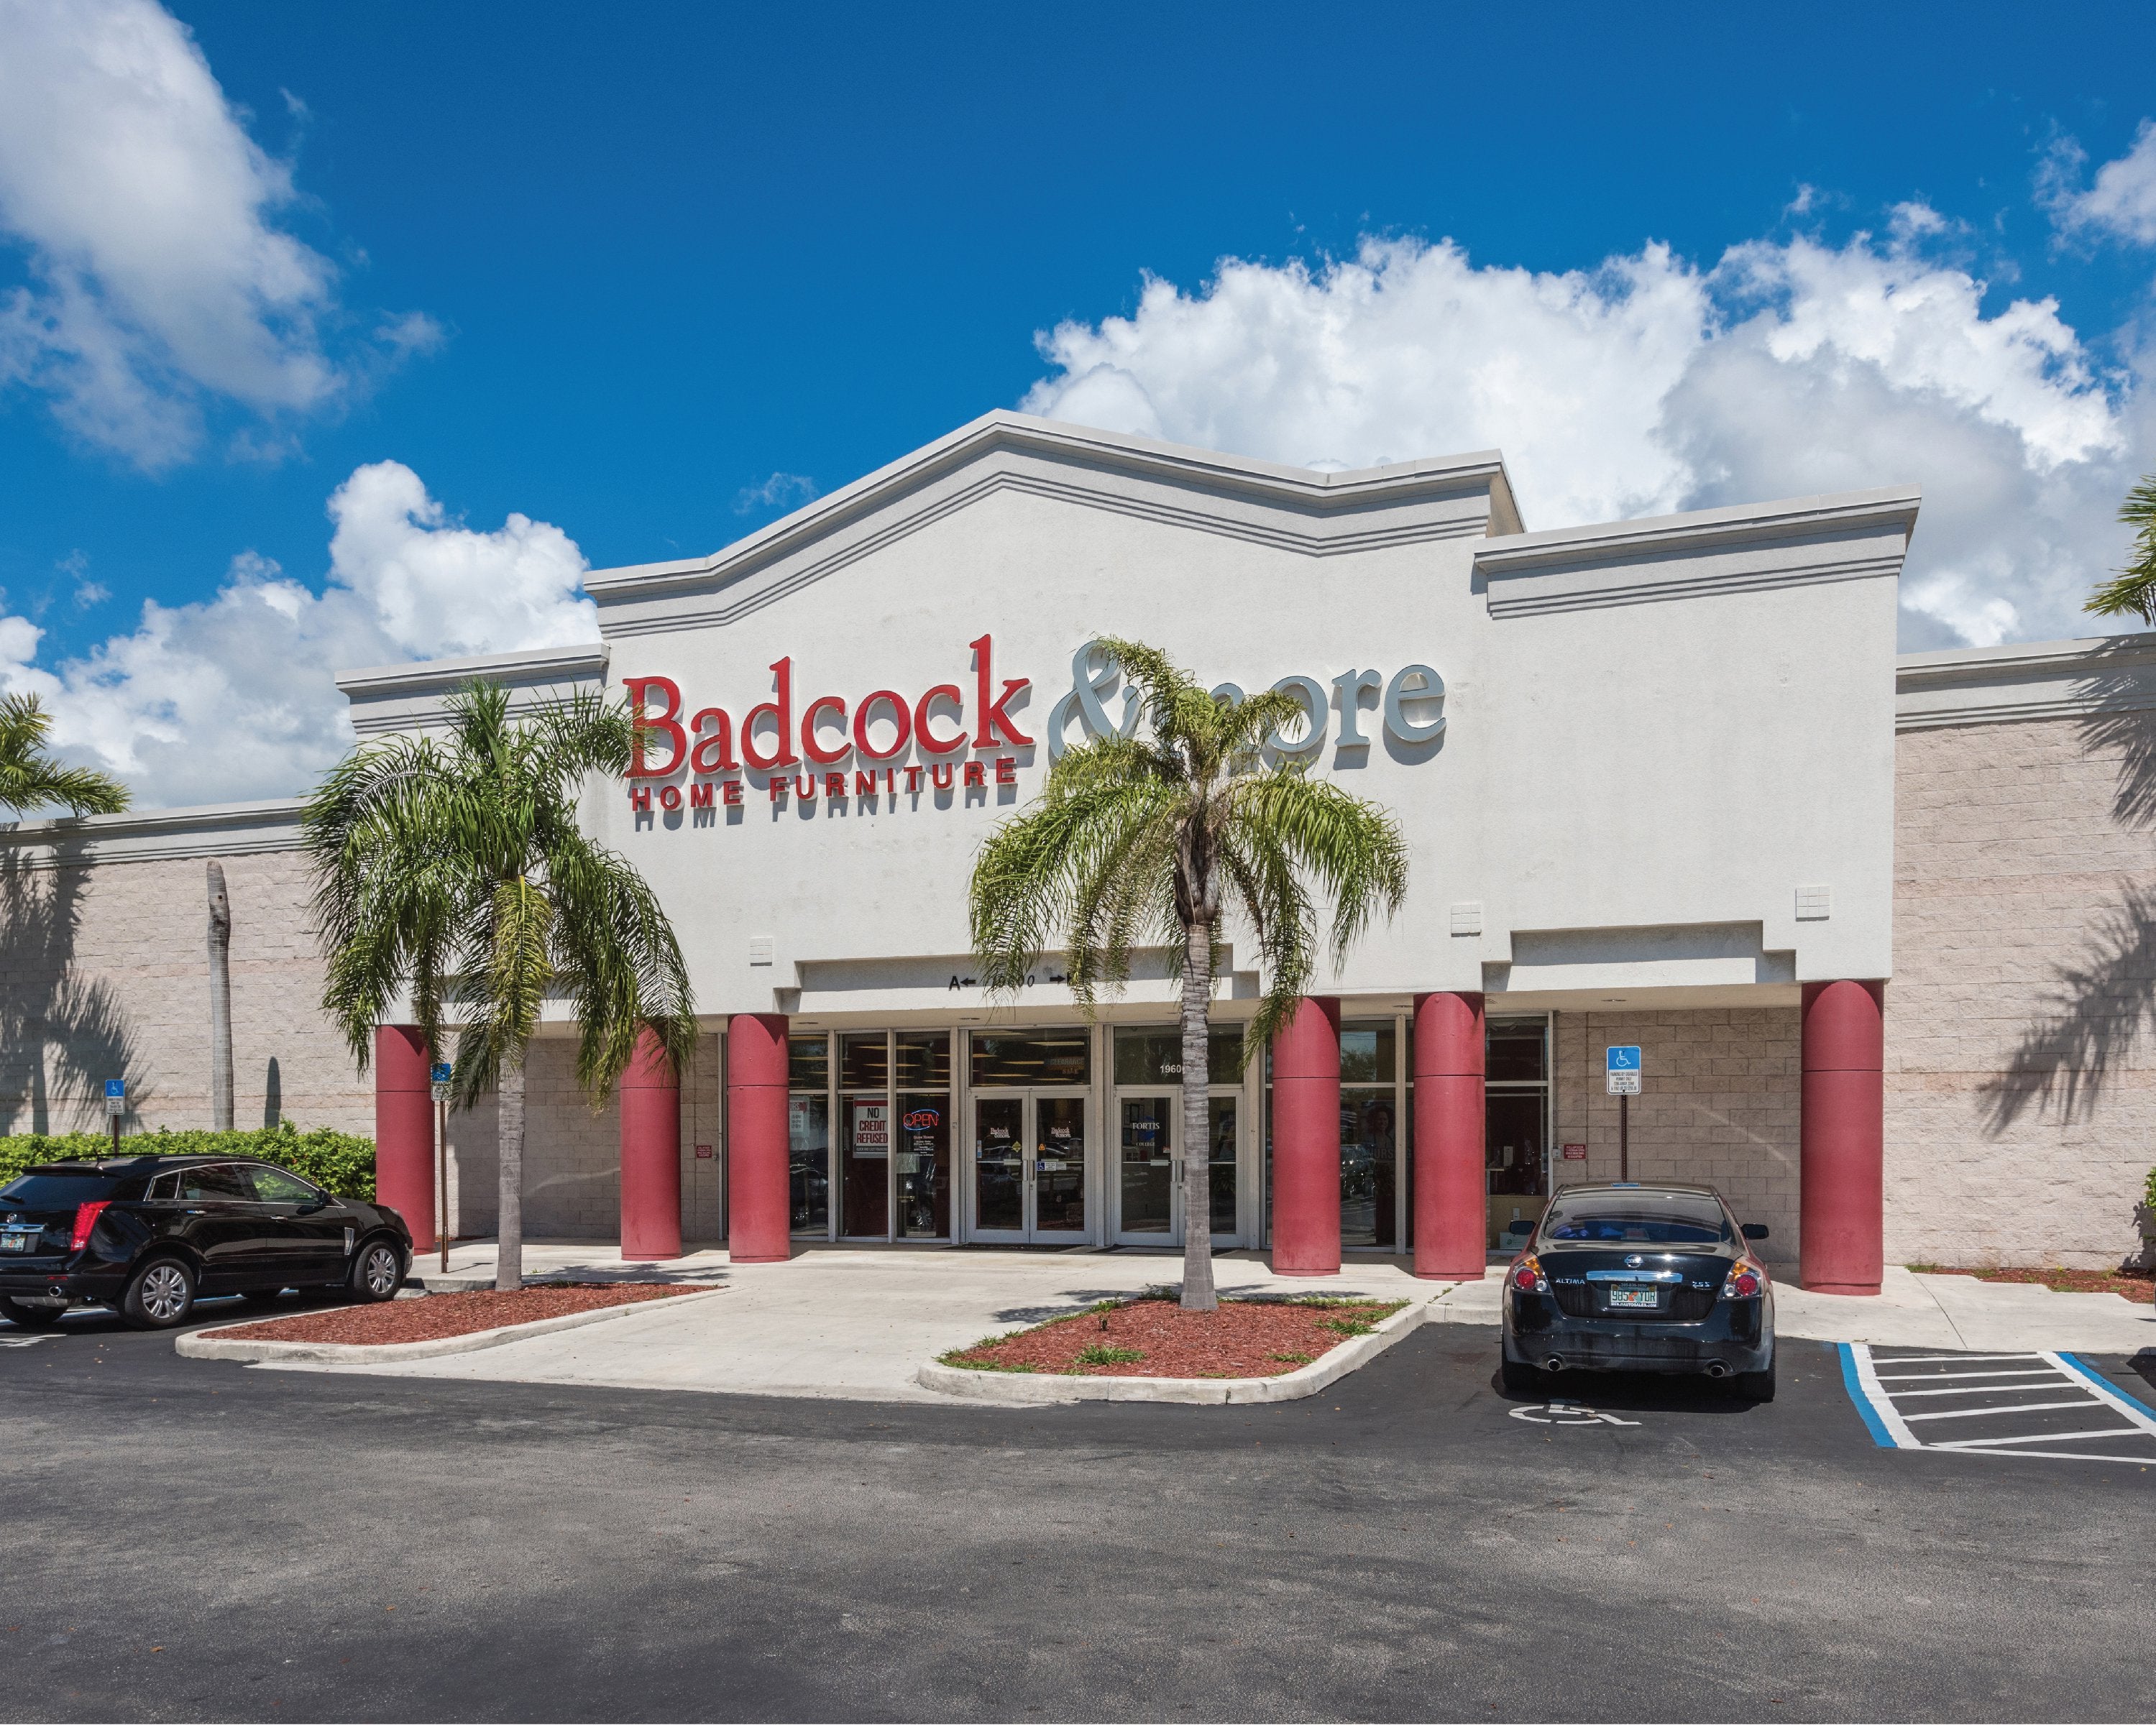 Badcock Home Furniture And More Of South Florida 19450 Nw 27th Ave Miami Gardens Fl Furniture 